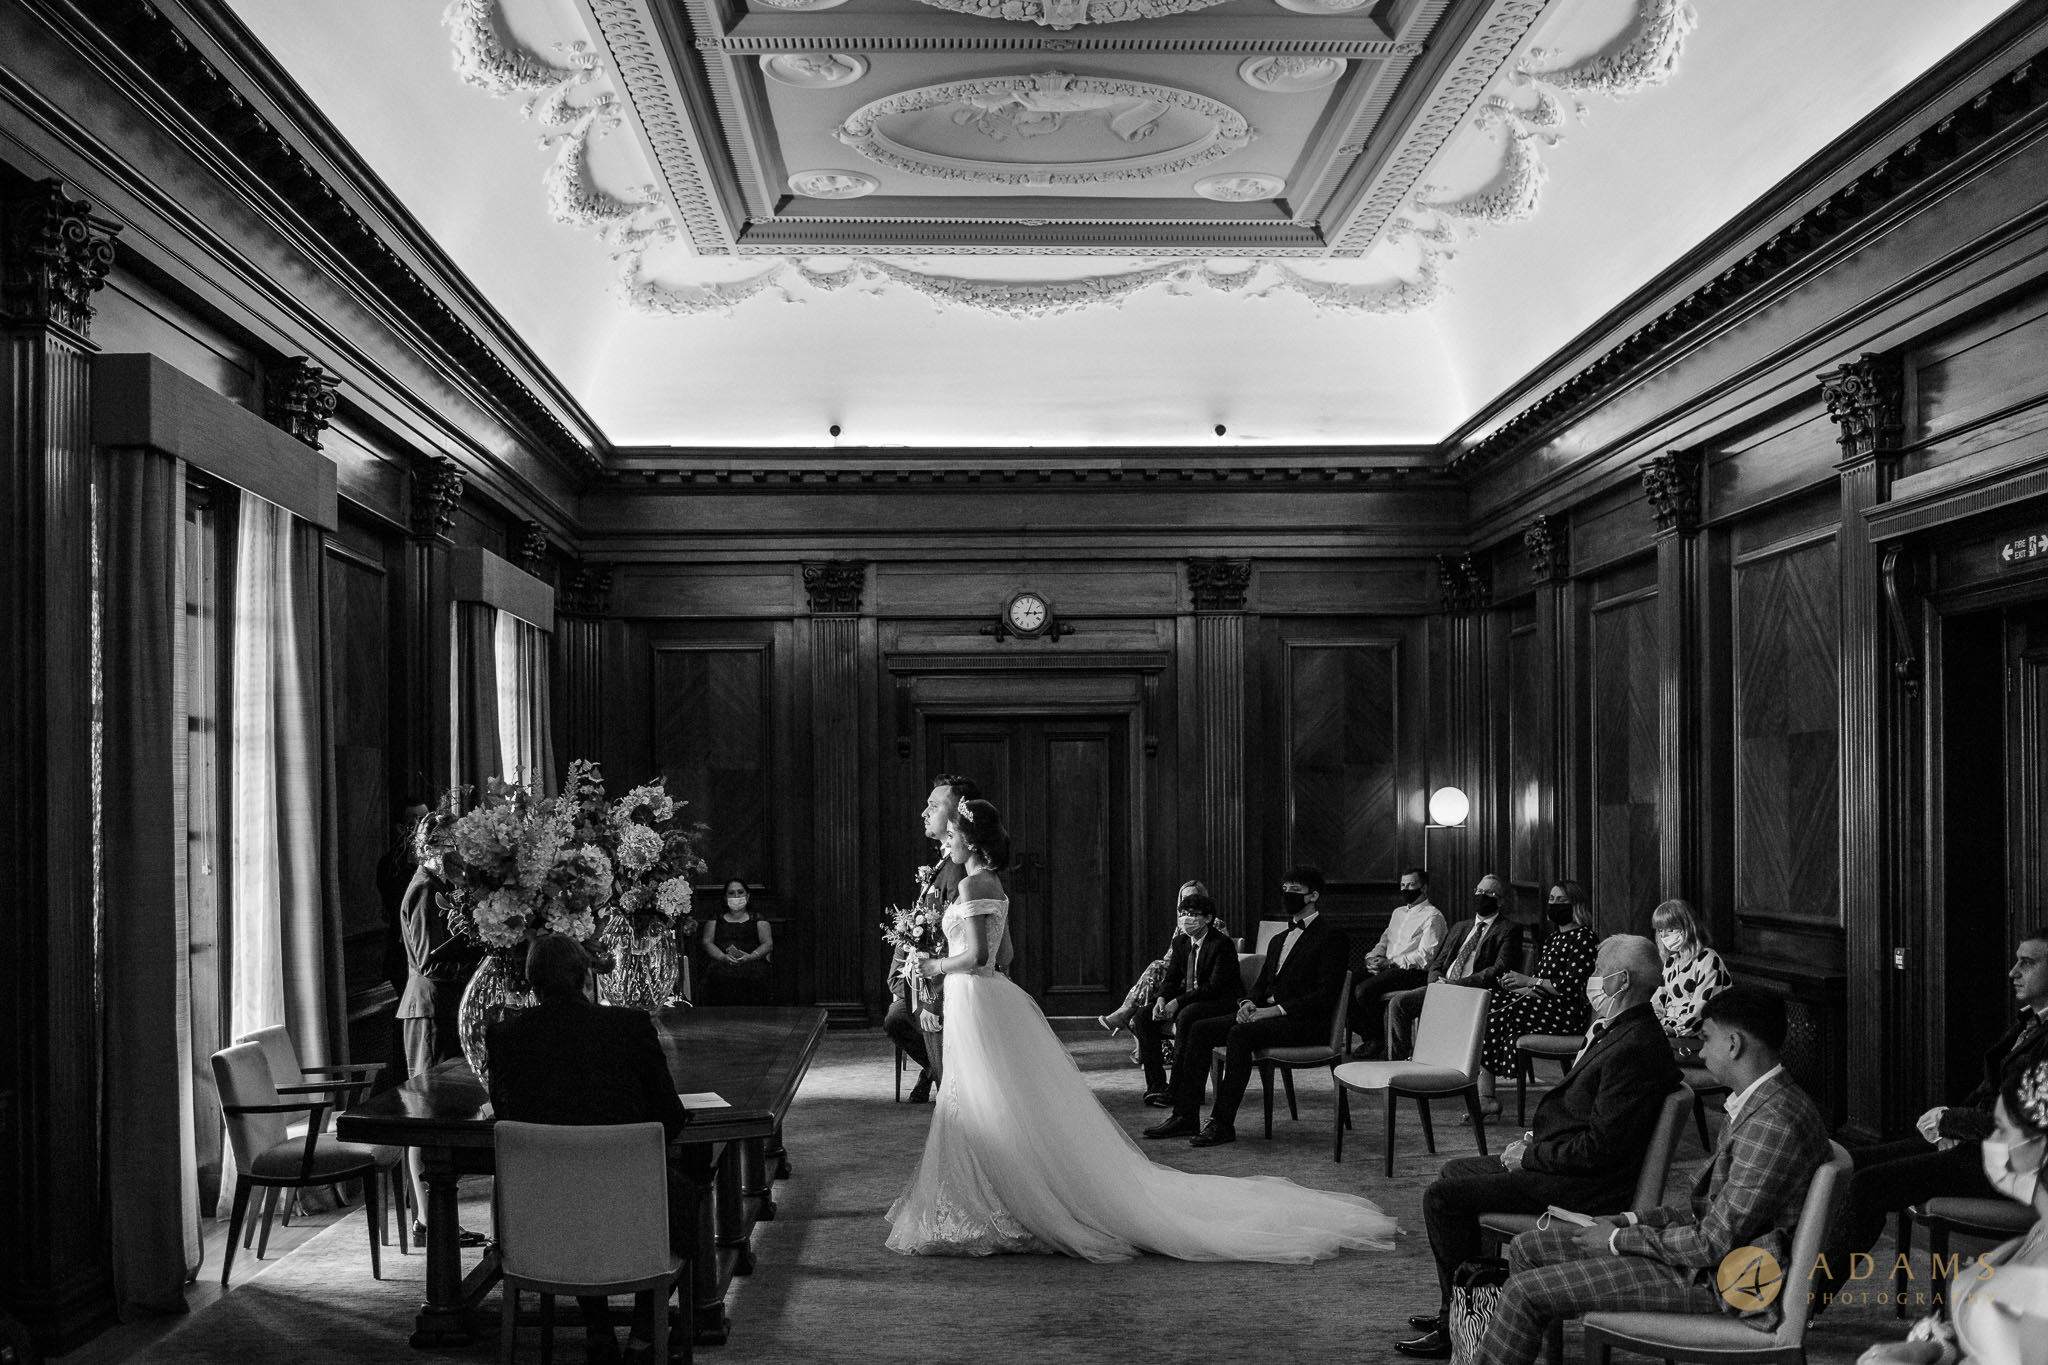 Black and white photo of the couple getting married in Westminster Room at Old Marylebone Town Hall